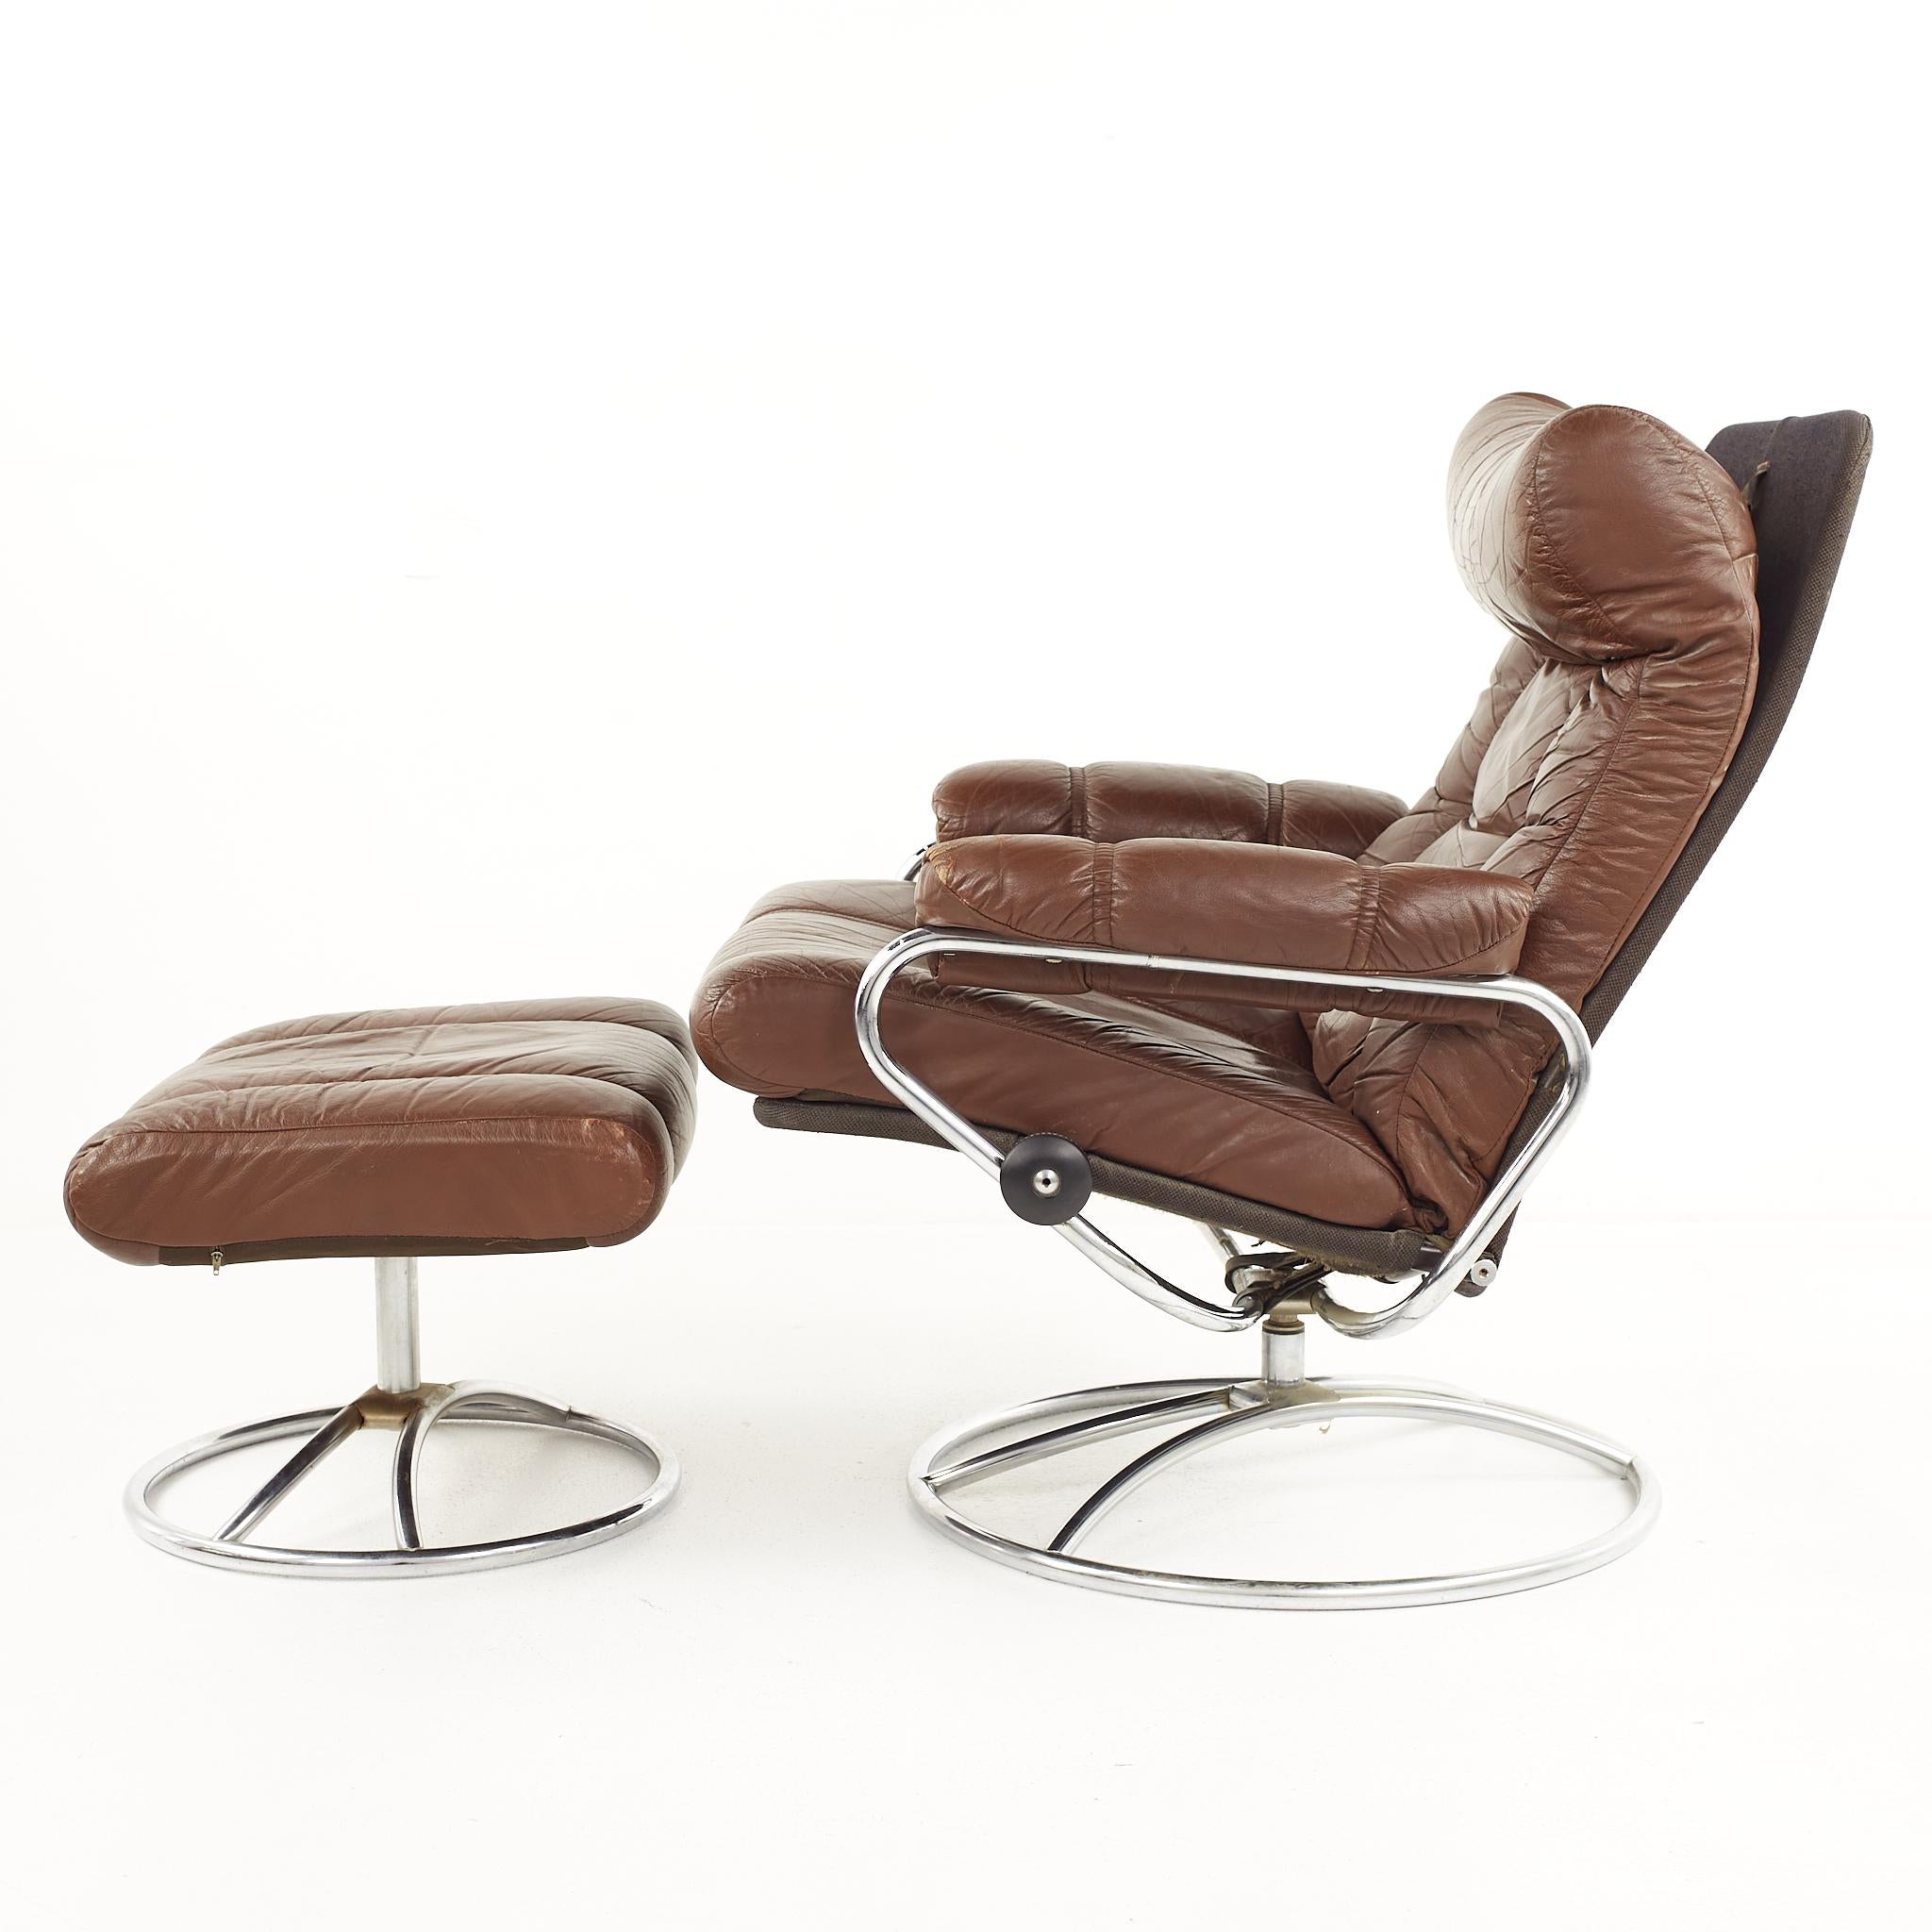 Mid-Century Modern Ekornes Mid-Century Chrome and Leather Stressless Lounge Chair and Ottoman